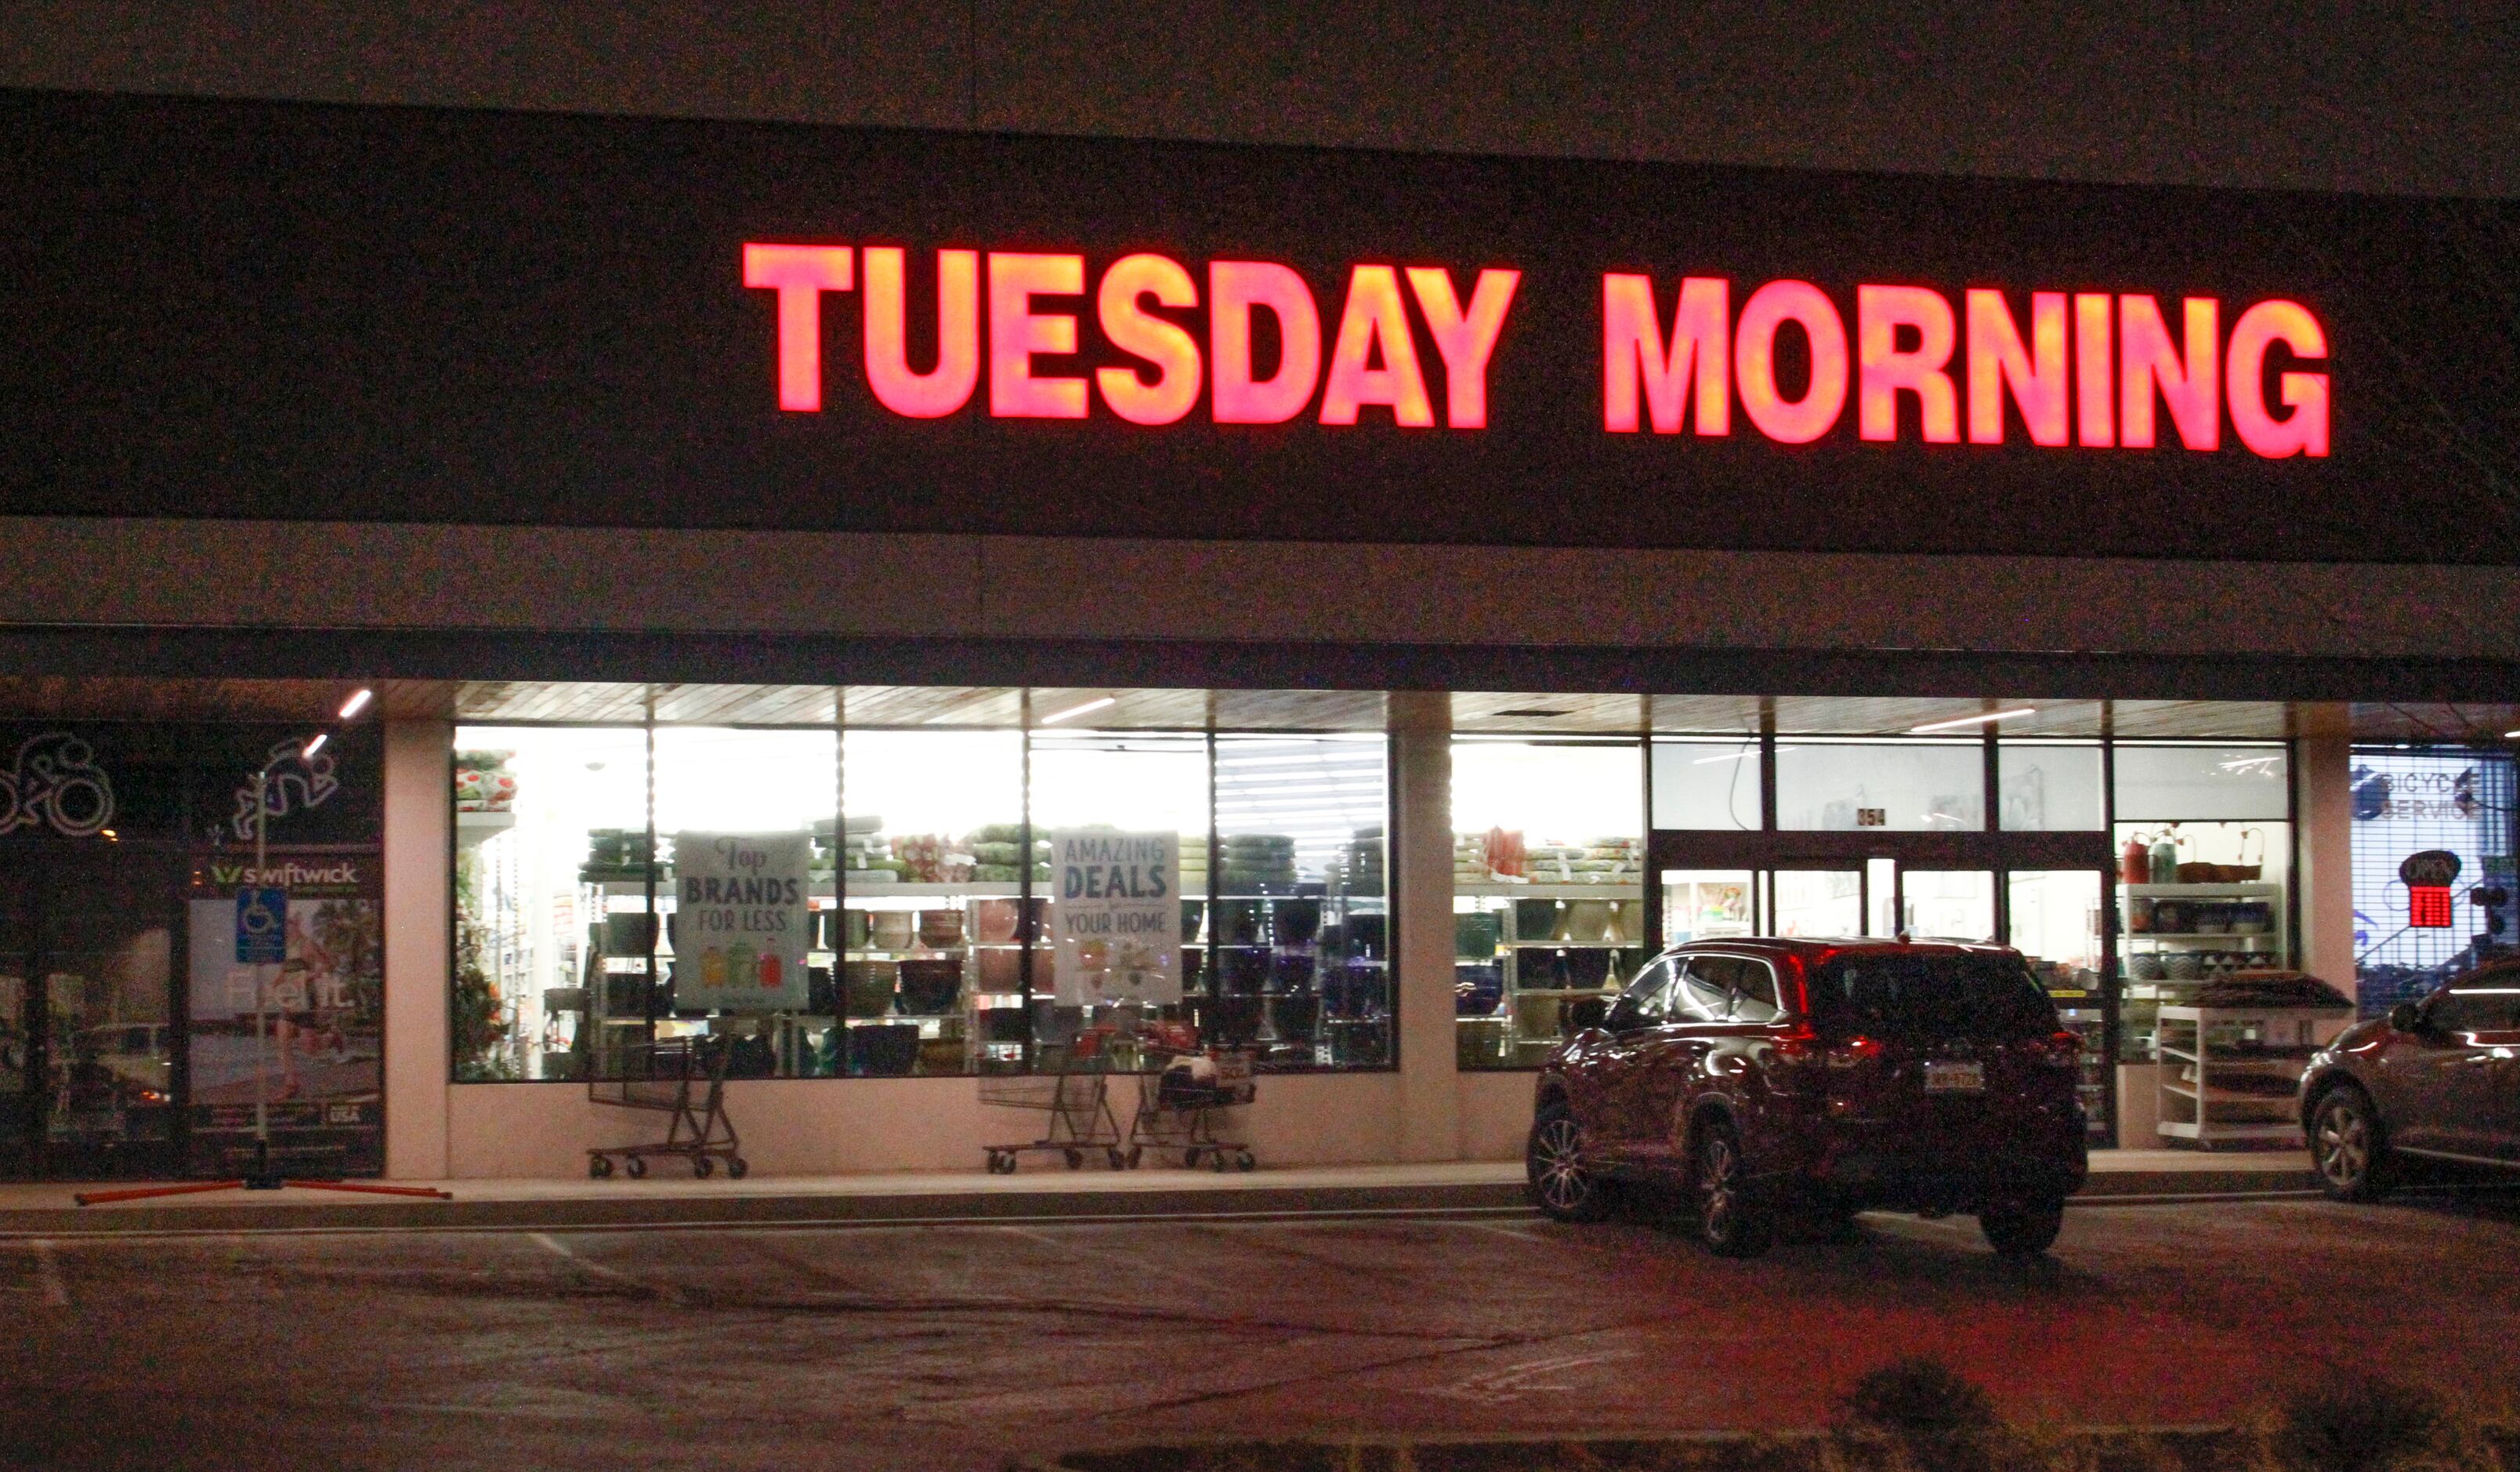 Off-Price Retailer Tuesday Morning Hands Back Hundreds of Keys to Landlords